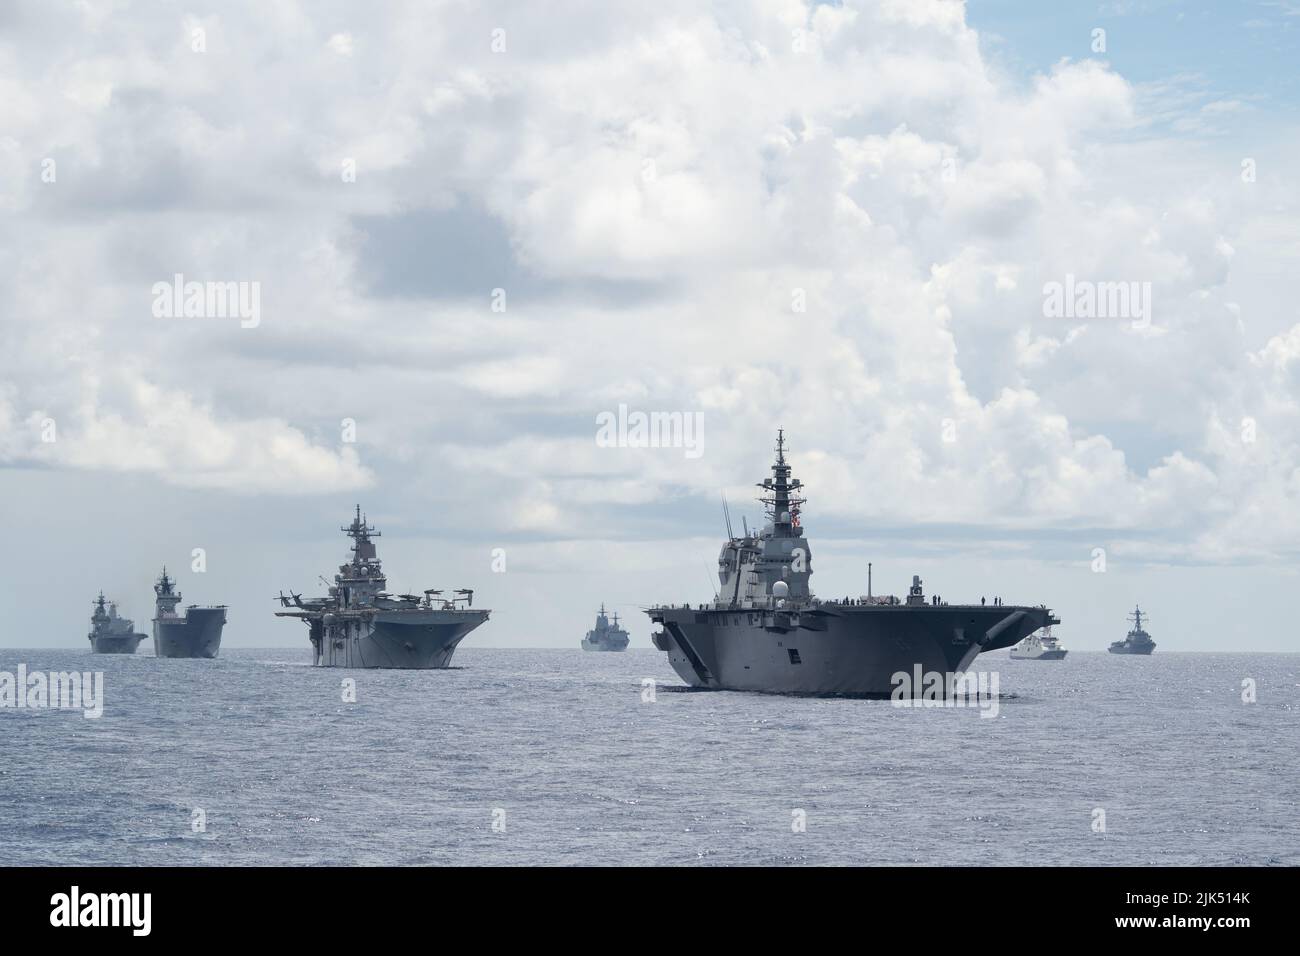 220728-N-KR961-0026 PACIFIC OCEAN (July 28, 2022) Japan Maritime Self-Defense Force helicopter carrier JS Izumo (DDH 183), U.S. Navy Wasp-class amphibious assault ship USS Essex (LHD 2), Royal Australian Navy landing helicopter dock HMAS Canberra (L02) and Republic of Korea Navy amphibious assaults ship ROKS Marado (LPH 6112) sail in formation during Rim of the Pacific (RIMPAC) 2022, July 28. Twenty-six nations, 38 ships, three submarines, more than 30 unmanned systems, approximately 170 aircraft and 25,000 personnel are participating in RIMPAC from June 29 to Aug. 4 in and around the Hawaiian Stock Photo